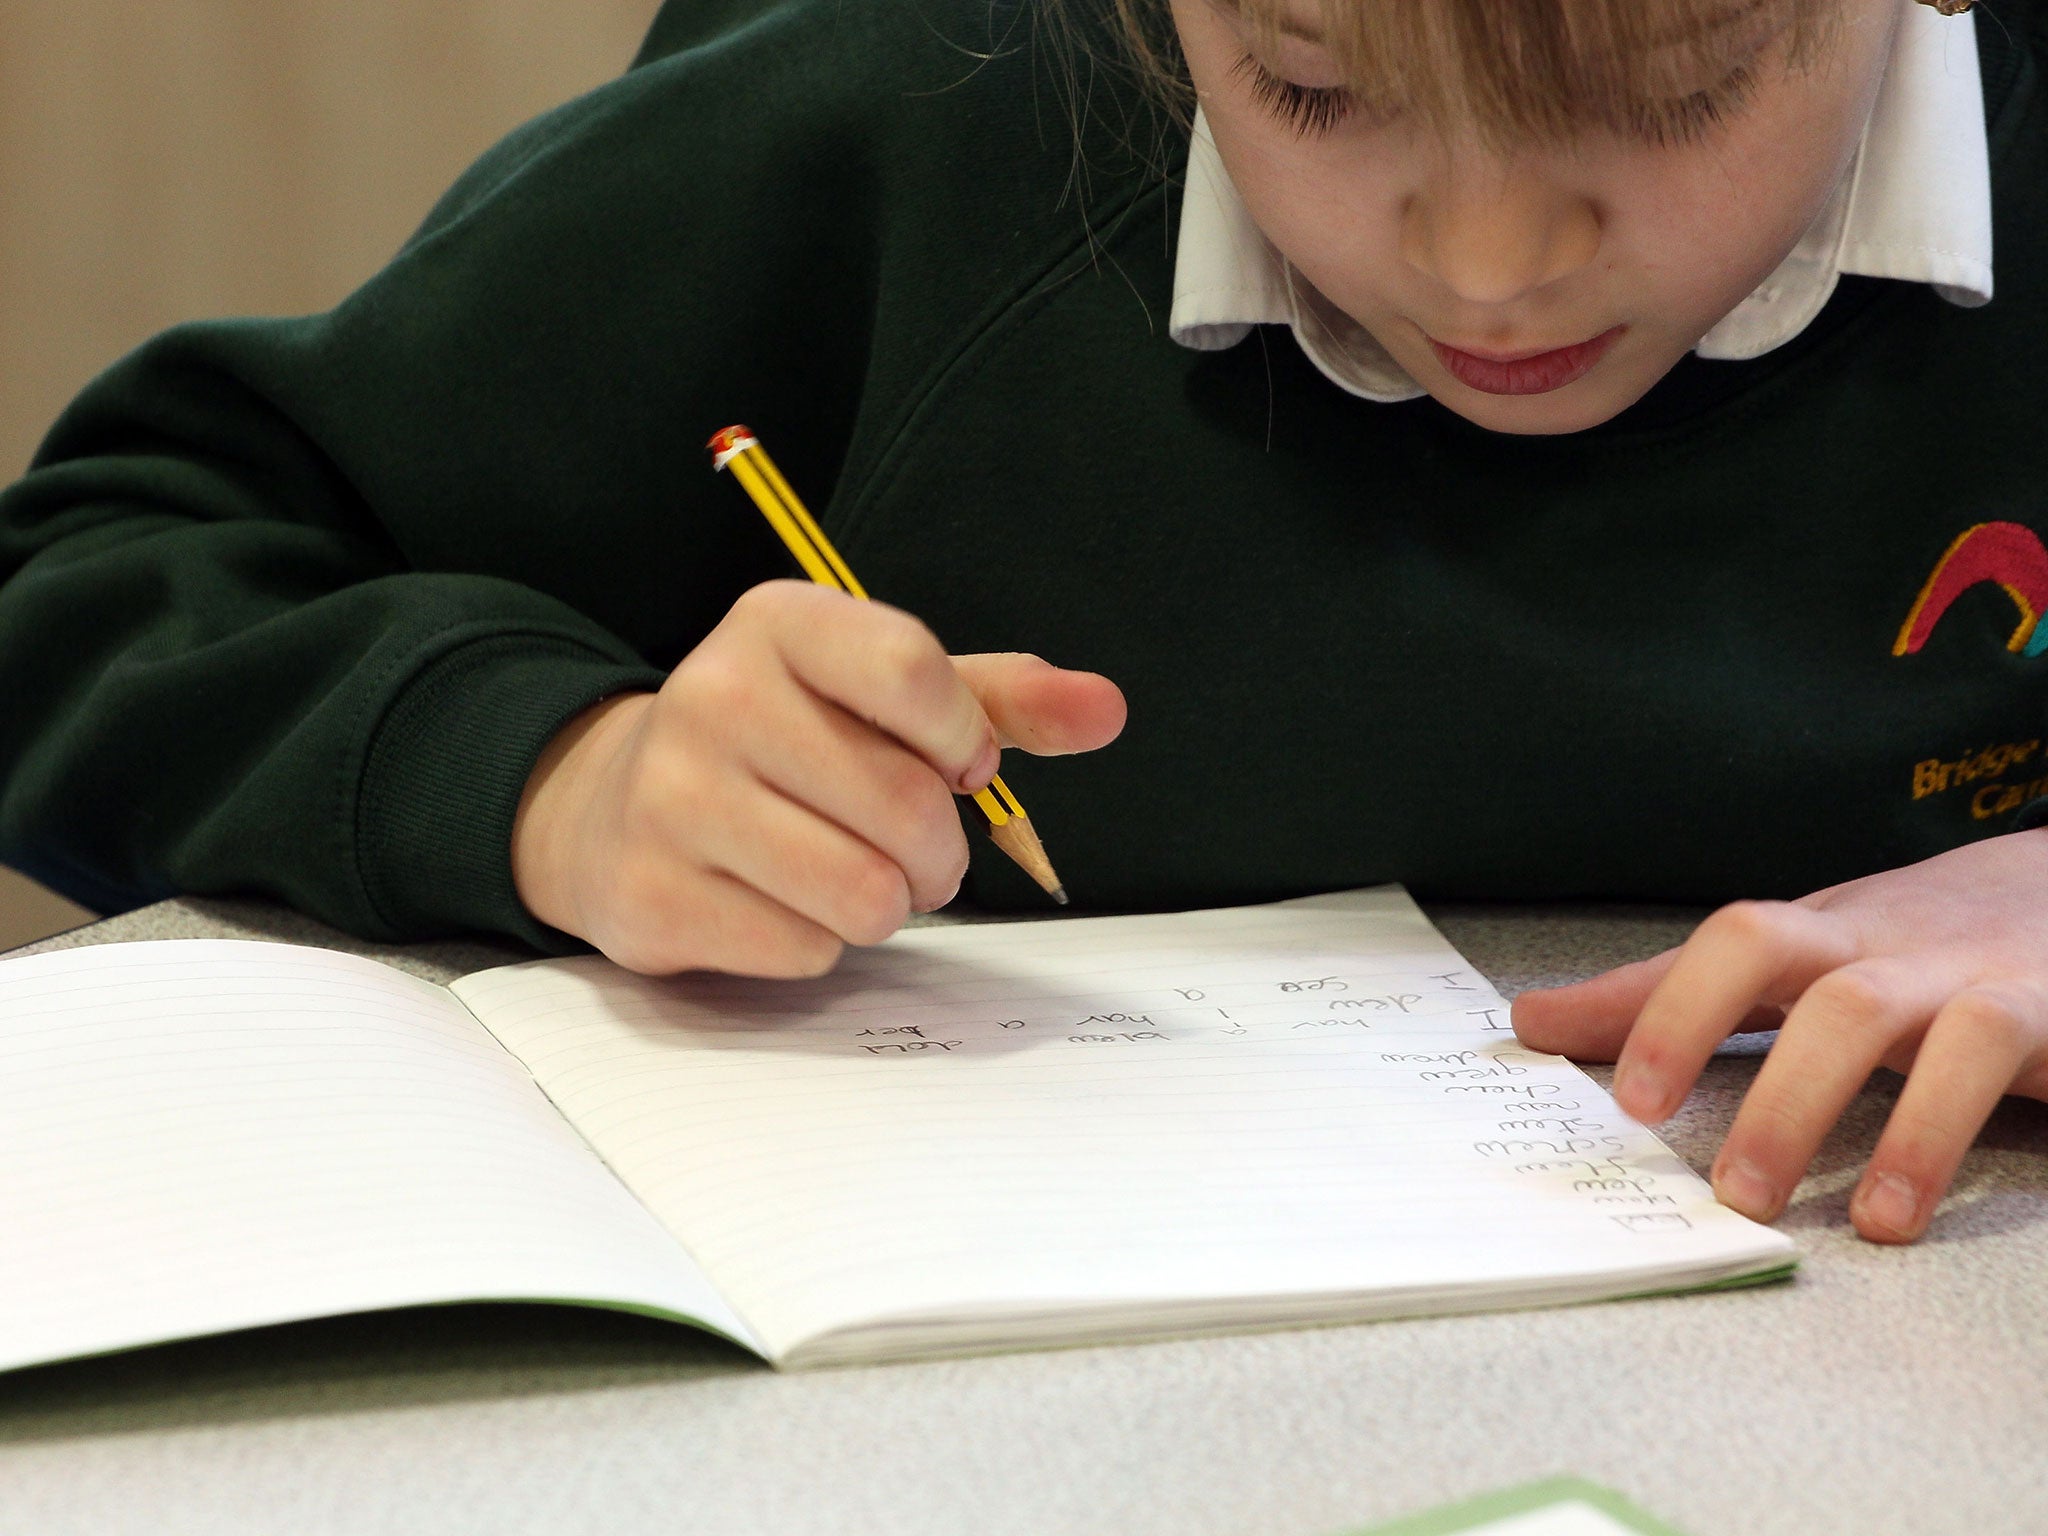 Four out of five children now reach the required standard in reading, writing and maths, compared with two in three in 2010